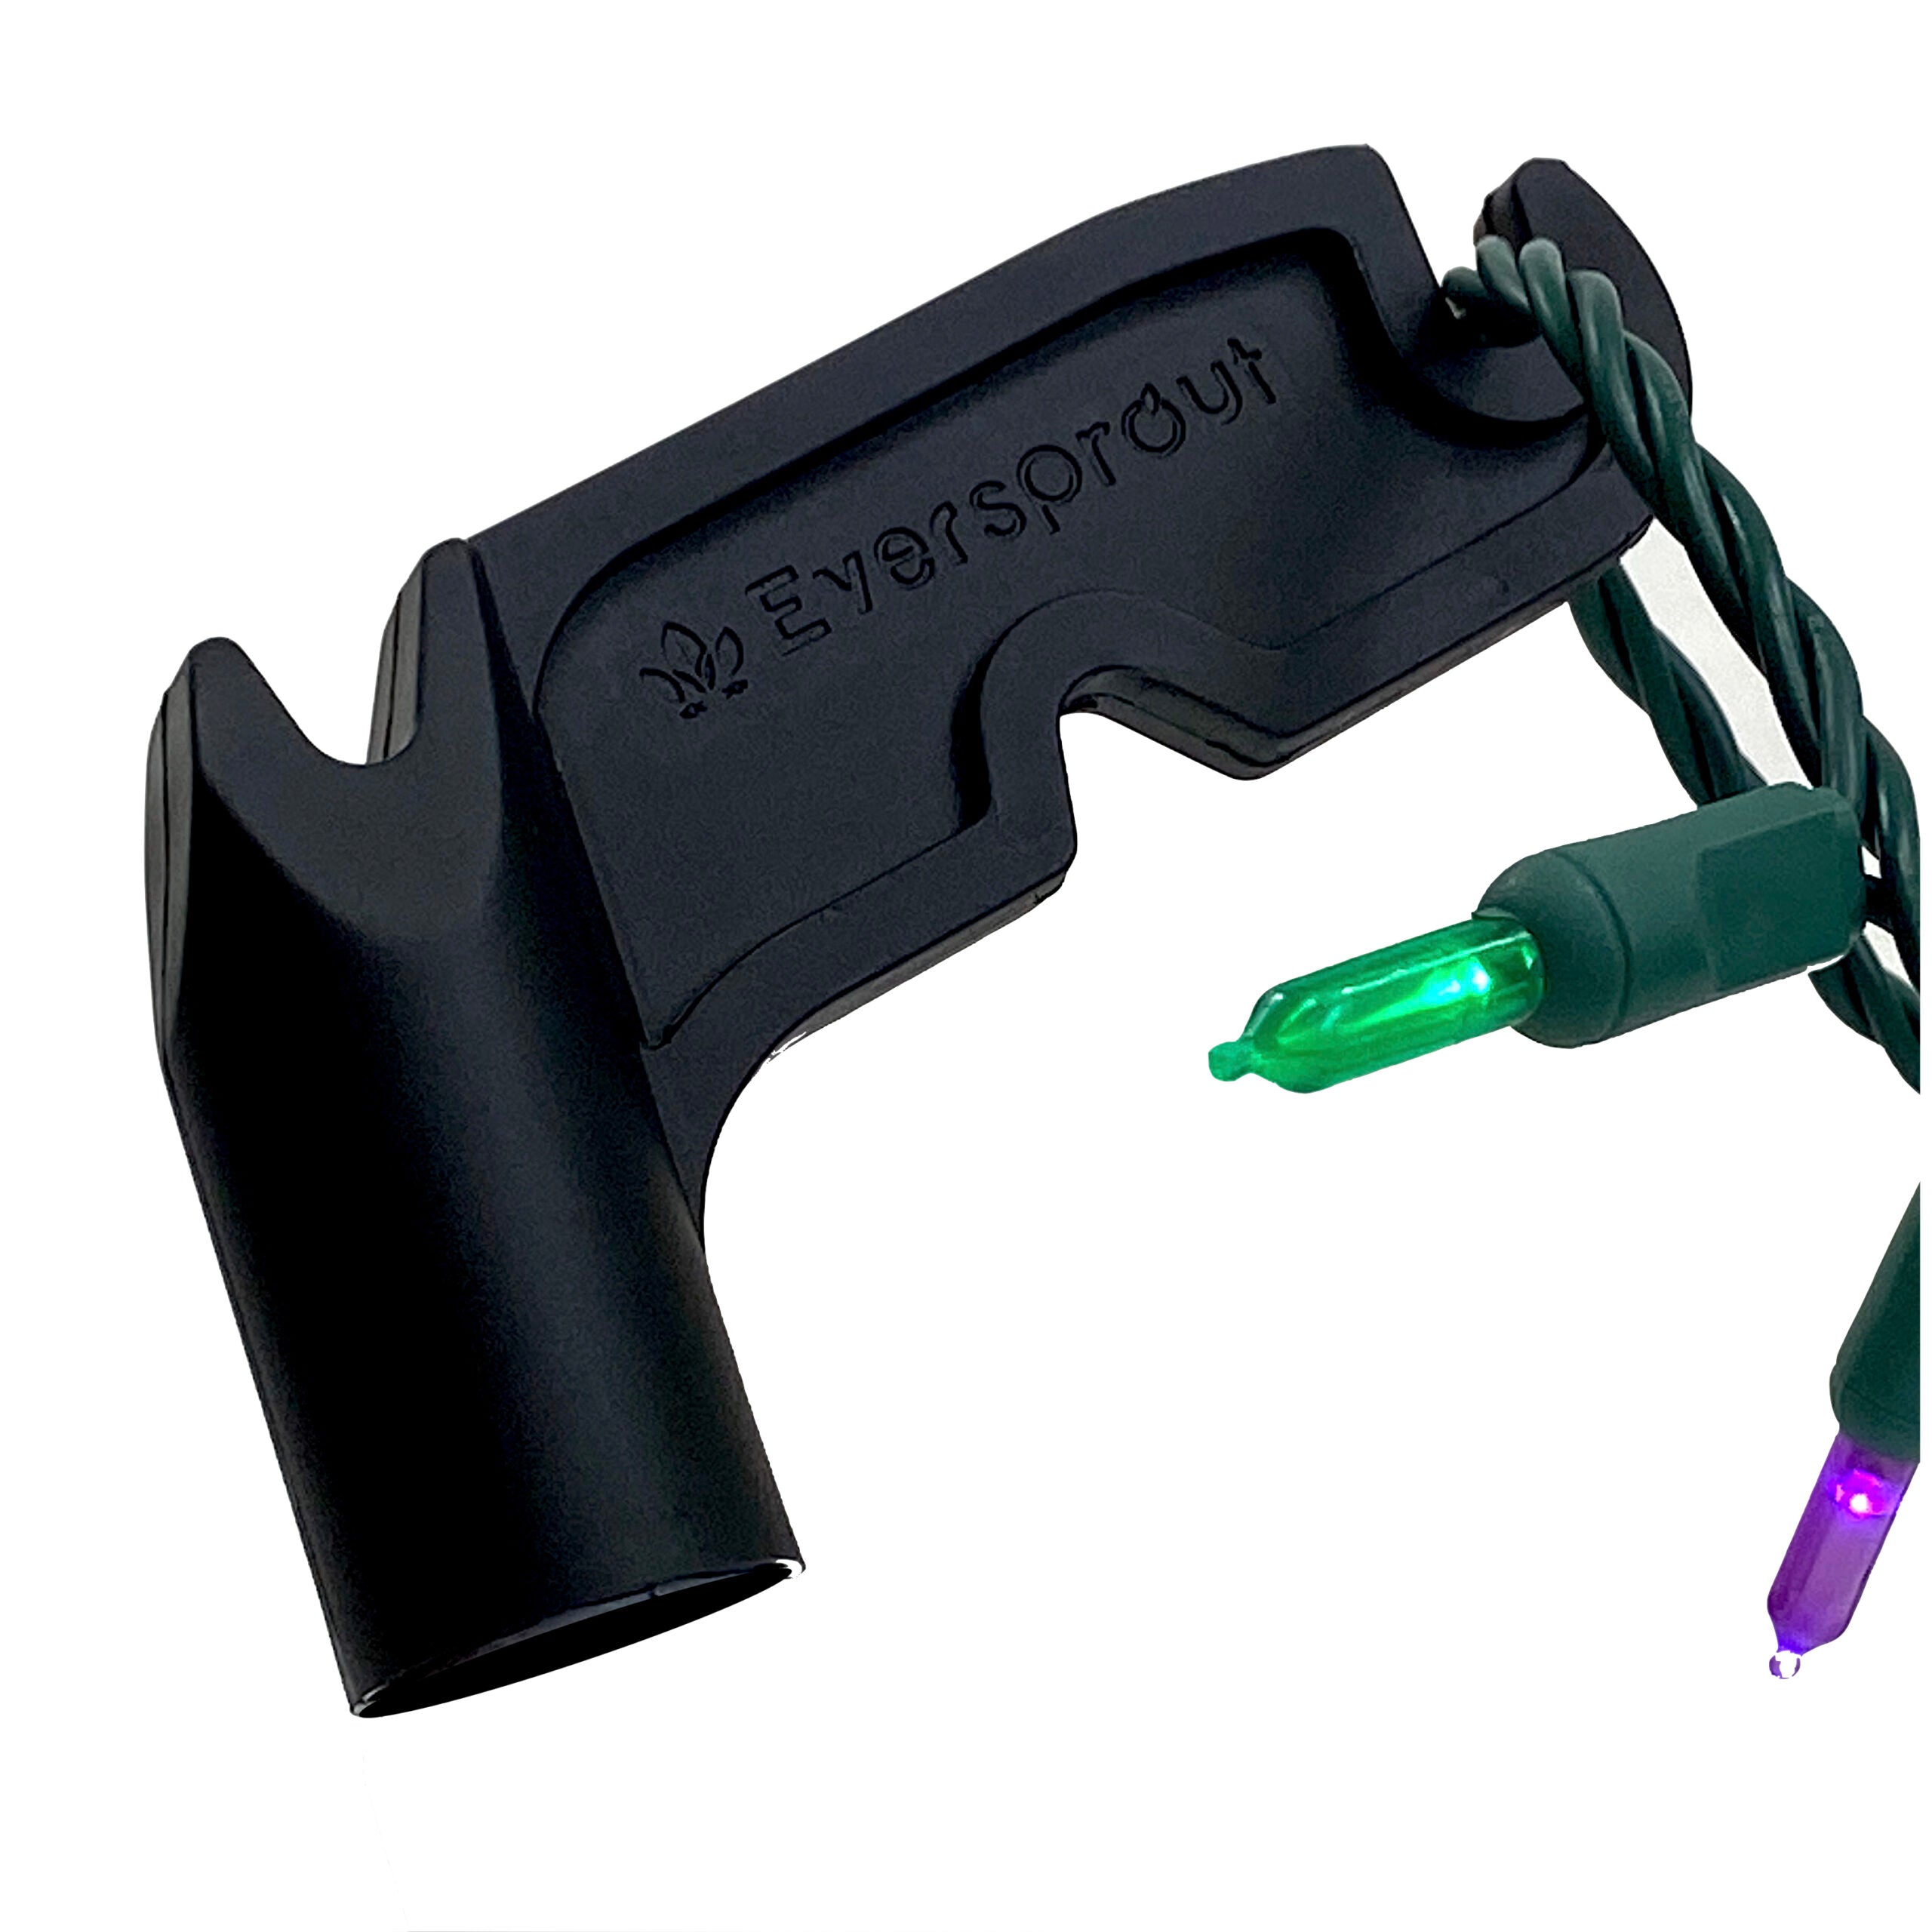 EVERSPROUT Telescoping Boat Hook